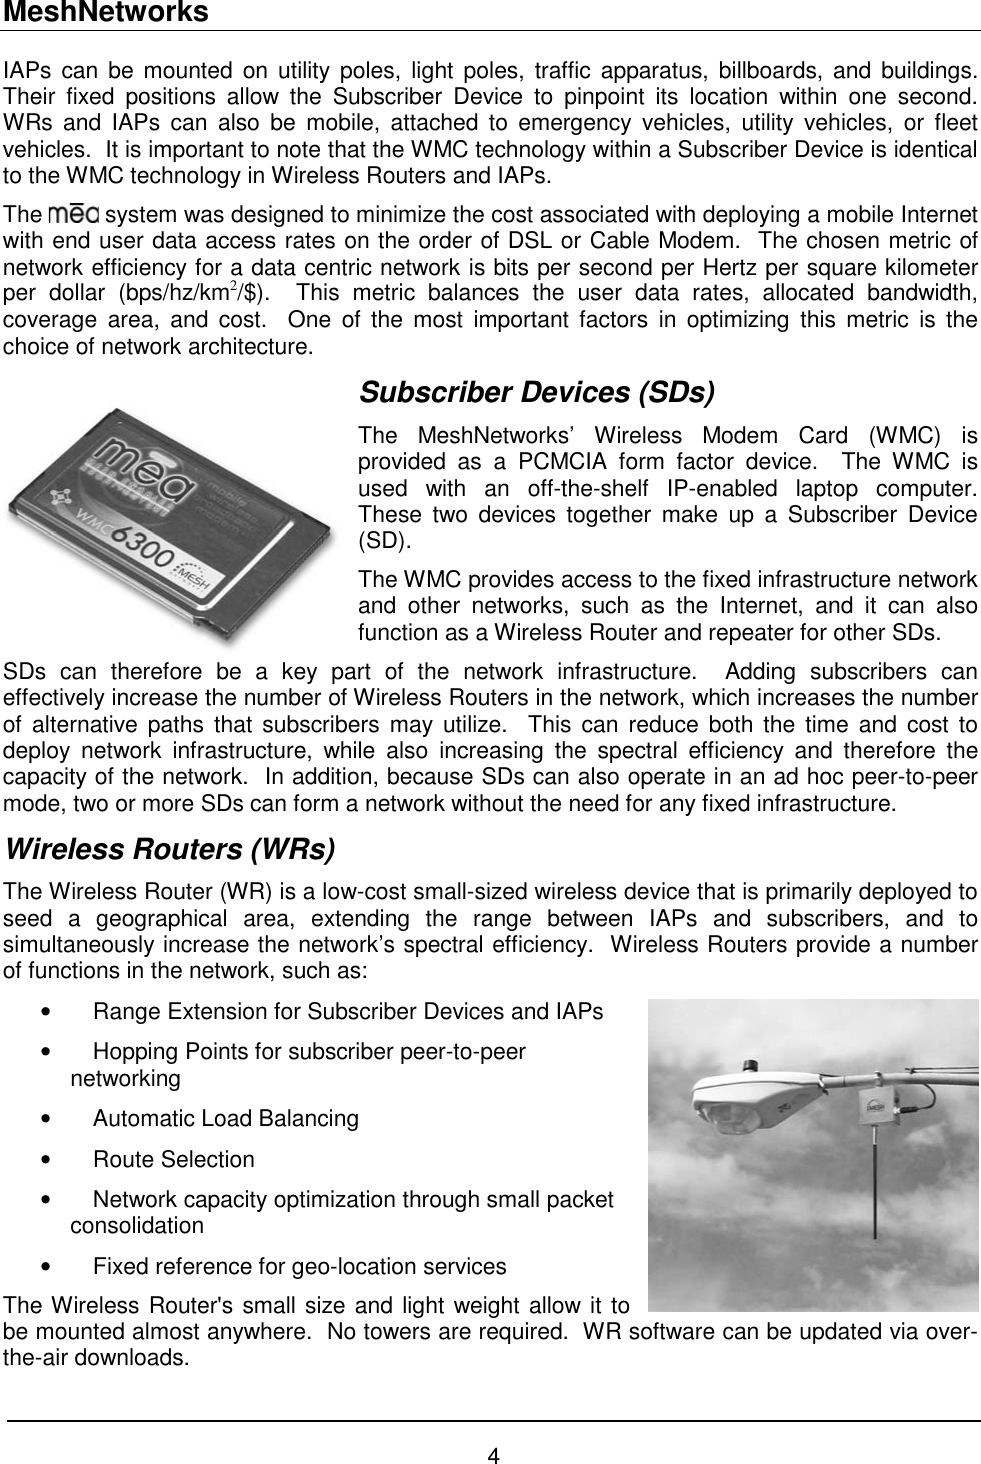 MeshNetworks 4 IAPs can be mounted on utility poles, light poles, traffic apparatus, billboards, and buildings.  Their fixed positions allow the Subscriber Device to pinpoint its location within one second.  WRs and IAPs can also be mobile, attached to emergency vehicles, utility vehicles, or fleet vehicles.  It is important to note that the WMC technology within a Subscriber Device is identical to the WMC technology in Wireless Routers and IAPs.  The   system was designed to minimize the cost associated with deploying a mobile Internet with end user data access rates on the order of DSL or Cable Modem.  The chosen metric of network efficiency for a data centric network is bits per second per Hertz per square kilometer per dollar (bps/hz/km2/$).  This metric balances the user data rates, allocated bandwidth, coverage area, and cost.  One of the most important factors in optimizing this metric is the choice of network architecture. Subscriber Devices (SDs) The MeshNetworks’ Wireless Modem Card (WMC) is provided as a PCMCIA form factor device.  The WMC is used with an off-the-shelf IP-enabled laptop computer.  These two devices together make up a Subscriber Device (SD). The WMC provides access to the fixed infrastructure network and other networks, such as the Internet, and it can also function as a Wireless Router and repeater for other SDs.  SDs can therefore be a key part of the network infrastructure.  Adding subscribers can effectively increase the number of Wireless Routers in the network, which increases the number of alternative paths that subscribers may utilize.  This can reduce both the time and cost to deploy network infrastructure, while also increasing the spectral efficiency and therefore the capacity of the network.  In addition, because SDs can also operate in an ad hoc peer-to-peer mode, two or more SDs can form a network without the need for any fixed infrastructure. Wireless Routers (WRs) The Wireless Router (WR) is a low-cost small-sized wireless device that is primarily deployed to seed a geographical area, extending the range between IAPs and subscribers, and to simultaneously increase the network’s spectral efficiency.  Wireless Routers provide a number of functions in the network, such as: •  Range Extension for Subscriber Devices and IAPs  •  Hopping Points for subscriber peer-to-peer networking  •  Automatic Load Balancing  • Route Selection •  Network capacity optimization through small packet consolidation •  Fixed reference for geo-location services The Wireless Router&apos;s small size and light weight allow it to be mounted almost anywhere.  No towers are required.  WR software can be updated via over-the-air downloads. 